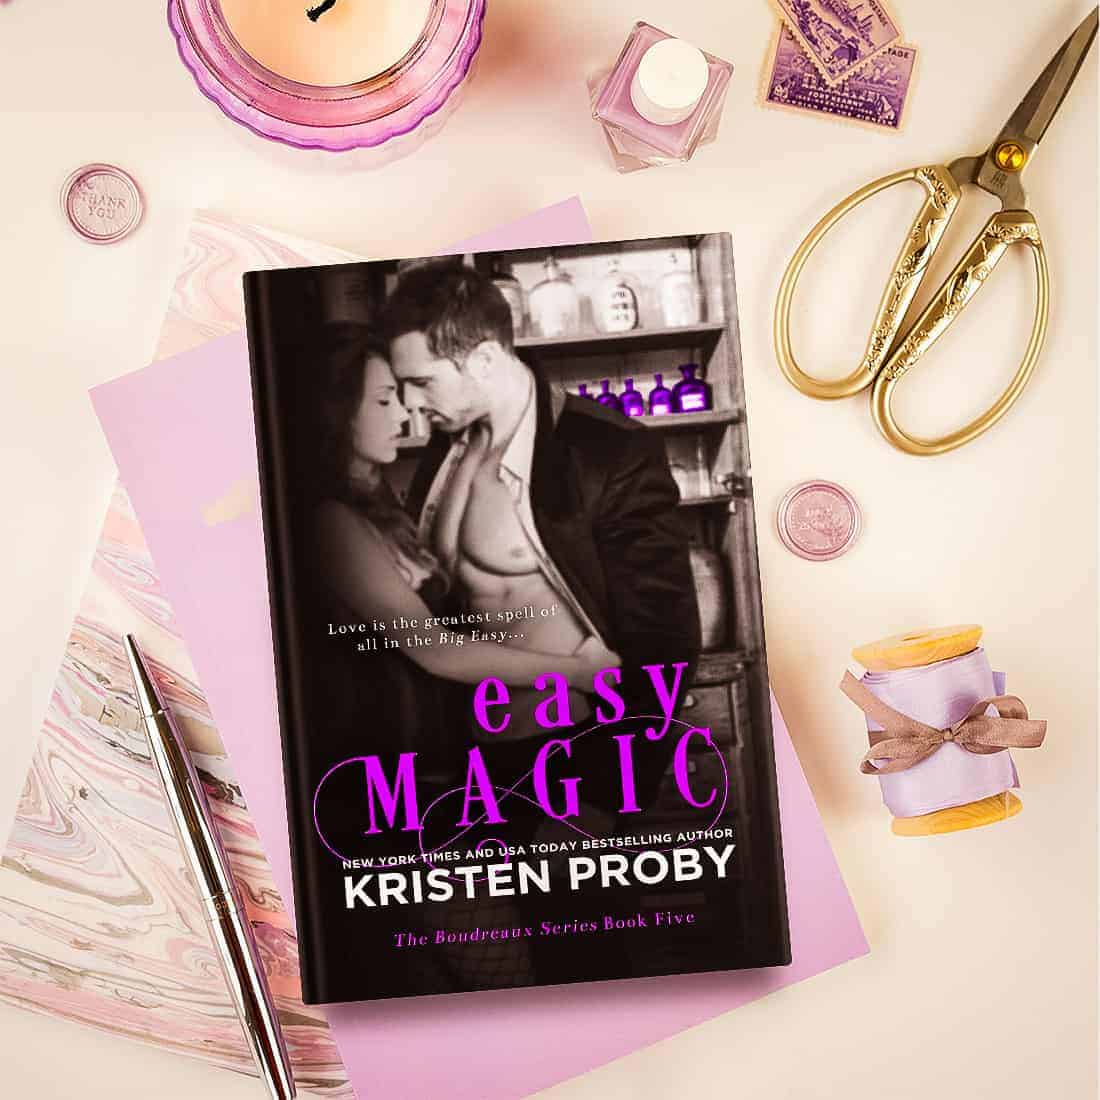 While Easy Magic is a charming and sweet romance first and foremost, there is an underlying supernatural story that gives it a unique spin on the ordinary contemporary romance.